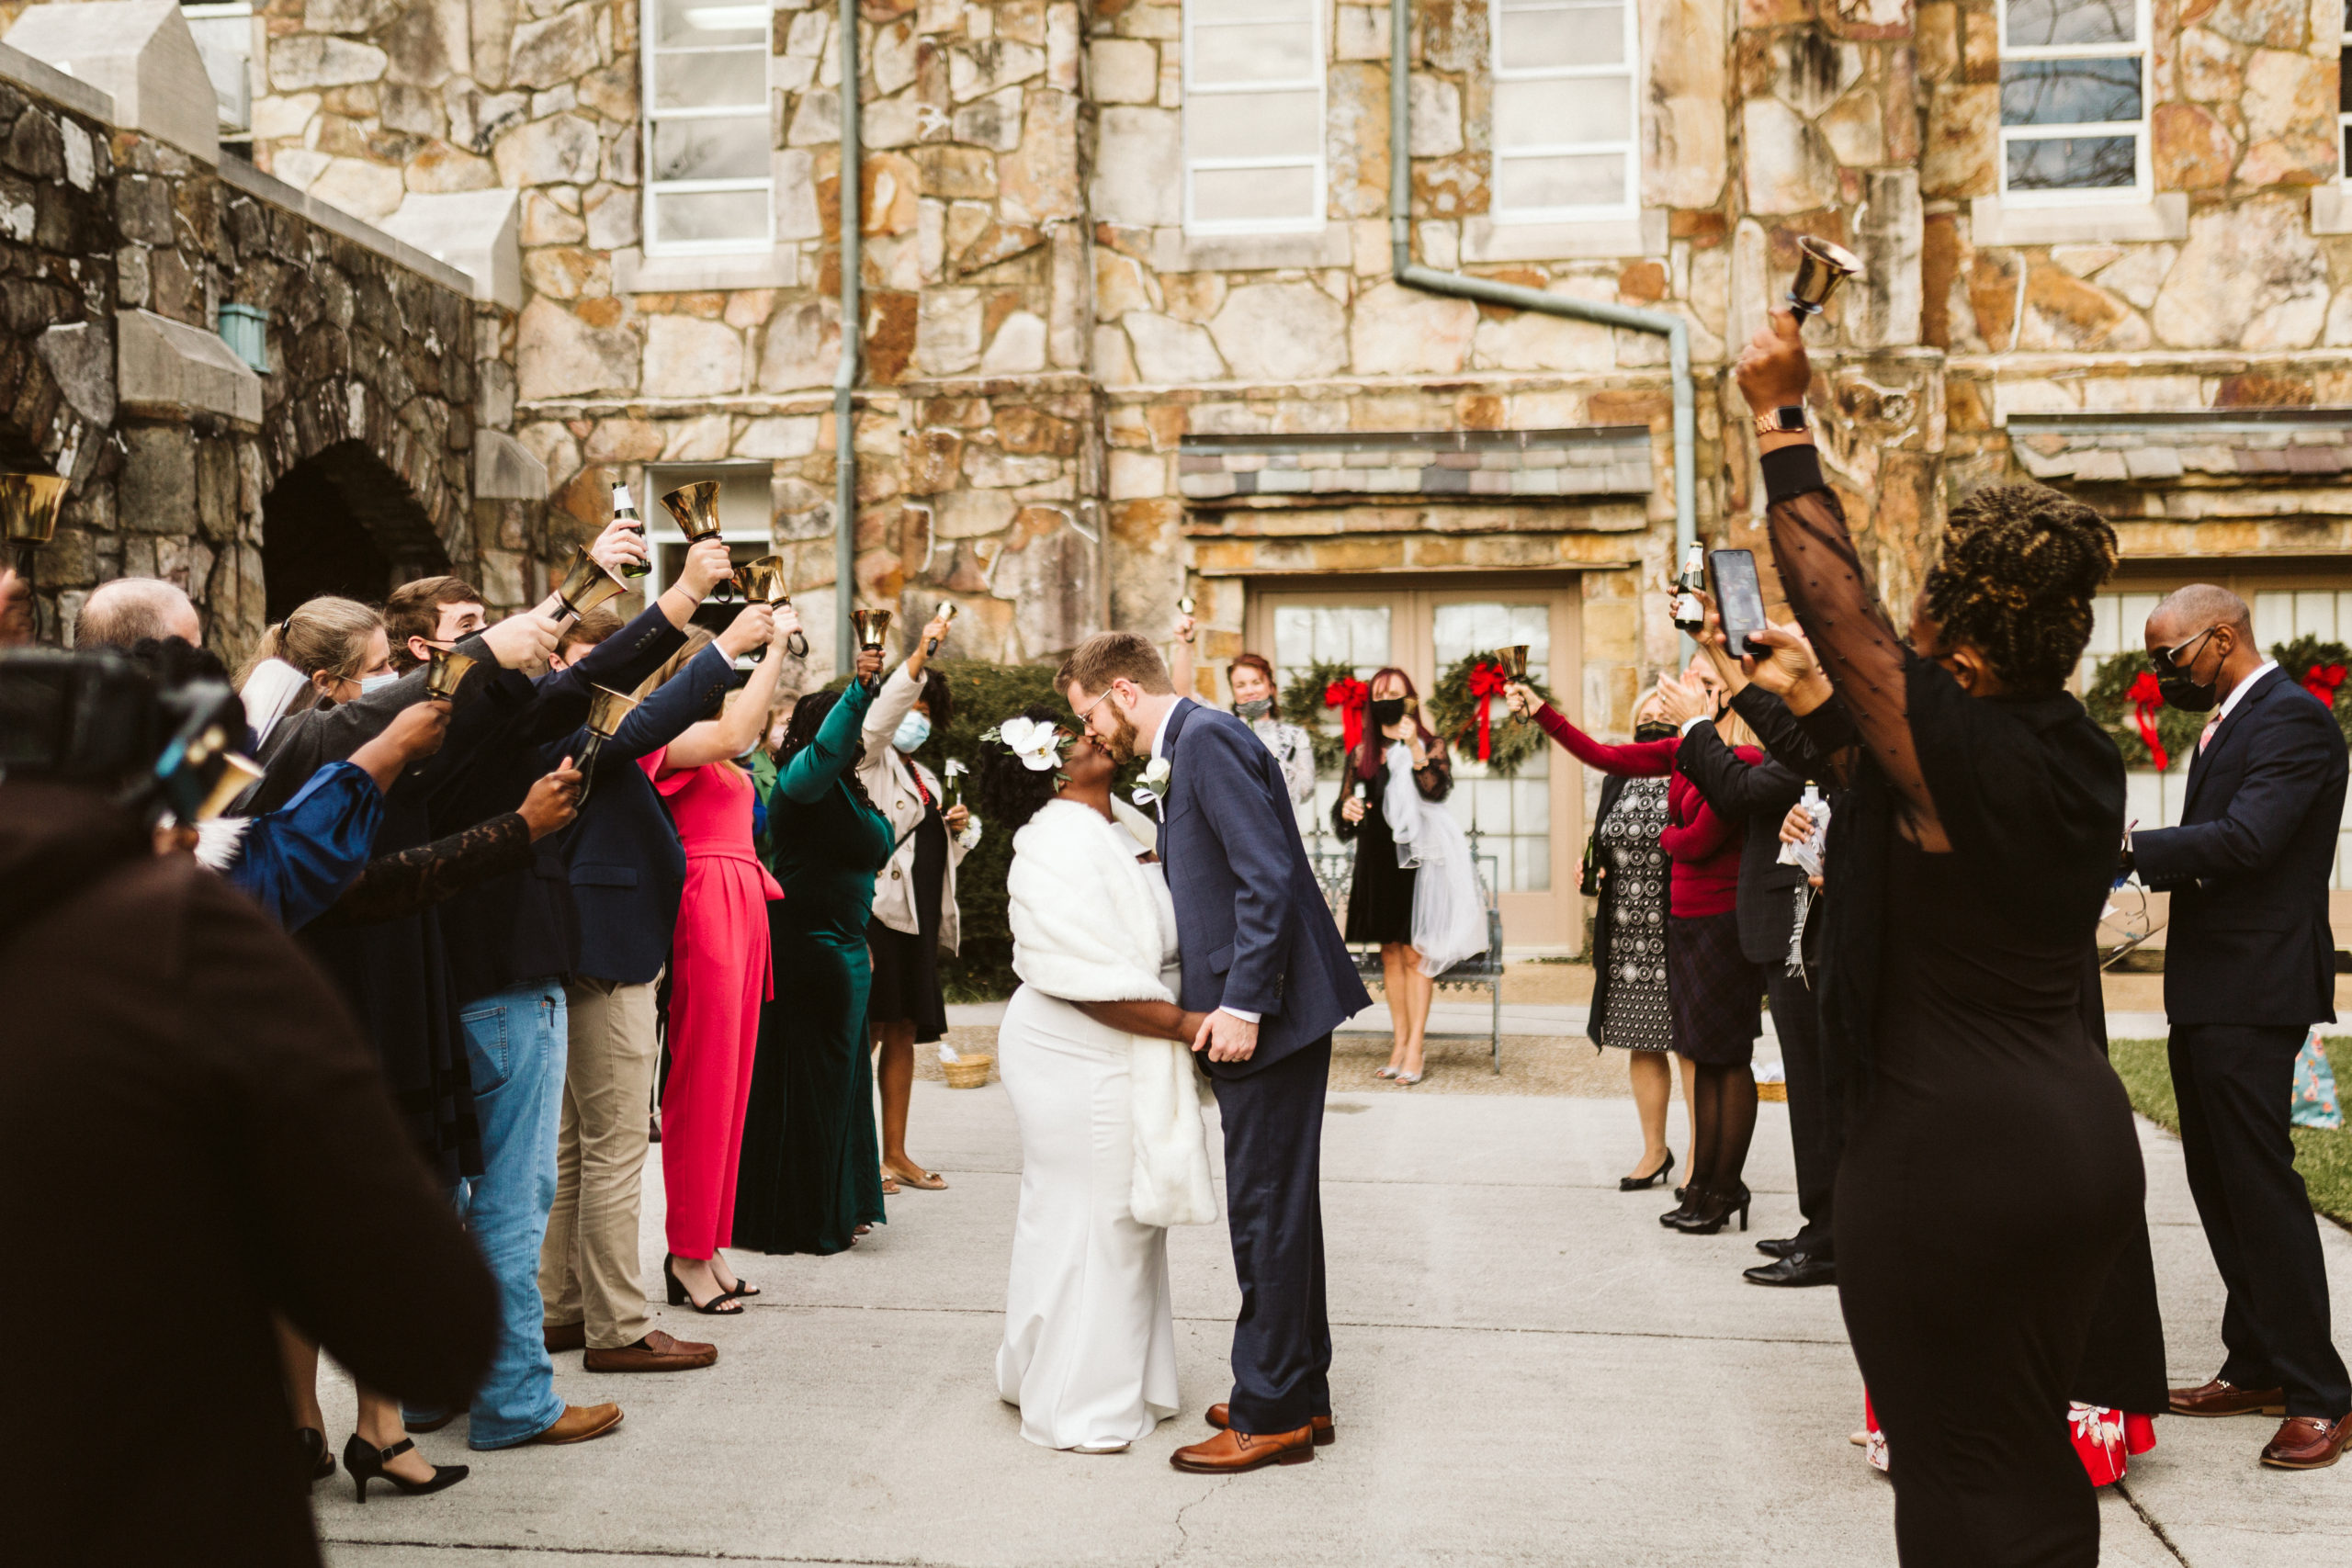 A bride and groom kiss in front of a stone building while their guests stand around them ringing bells.